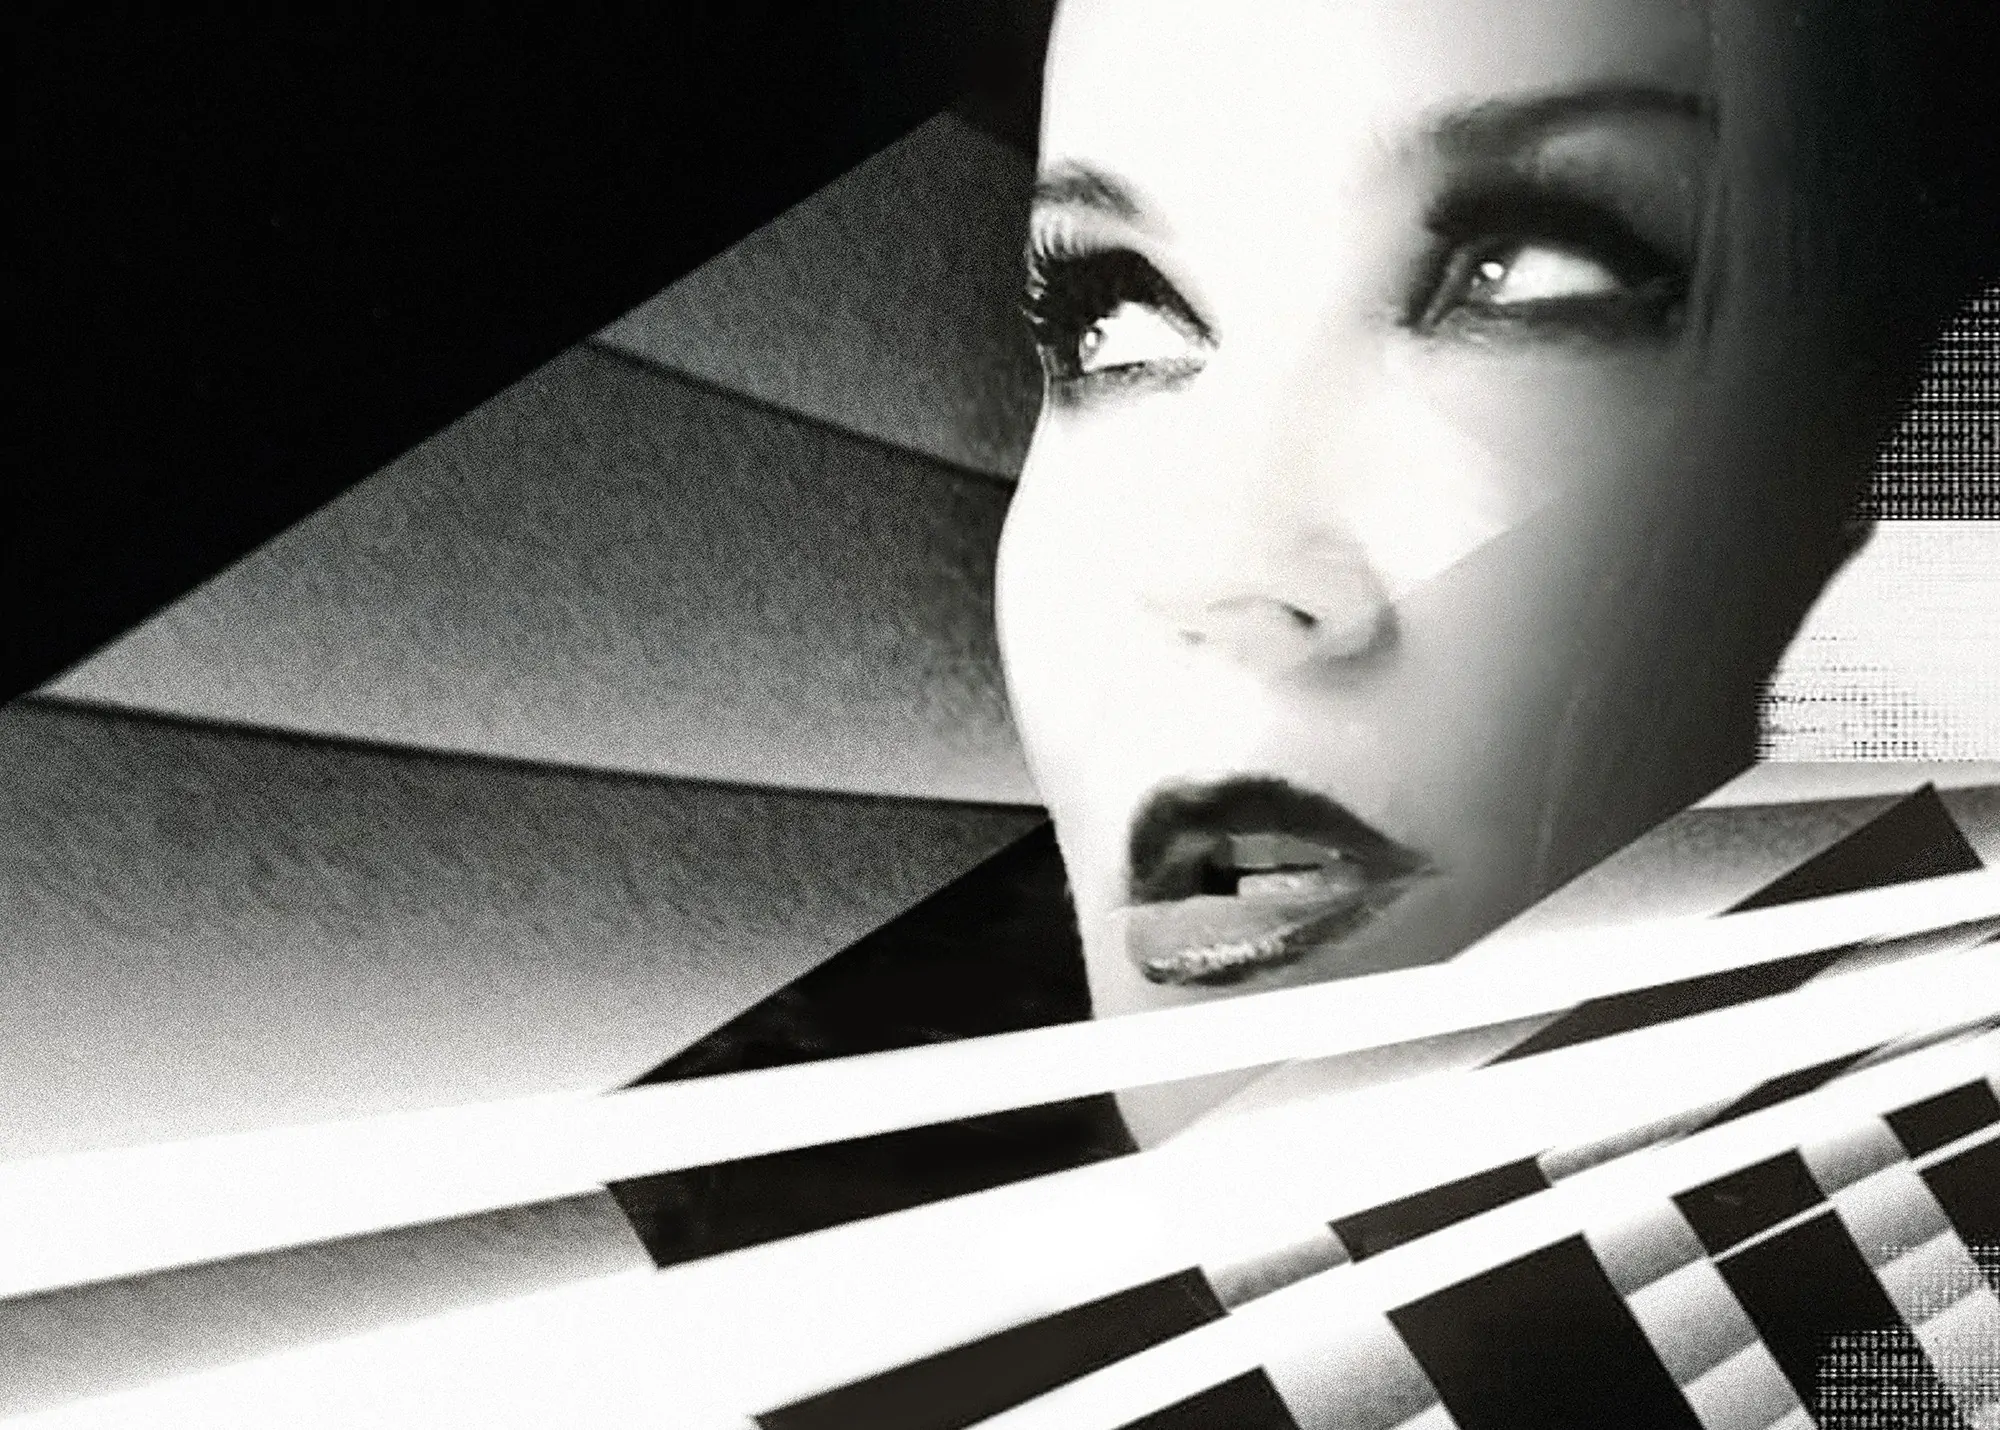 DAPHNE GUINNESS shares video for new single ‘Looking Glass’ – Watch Now